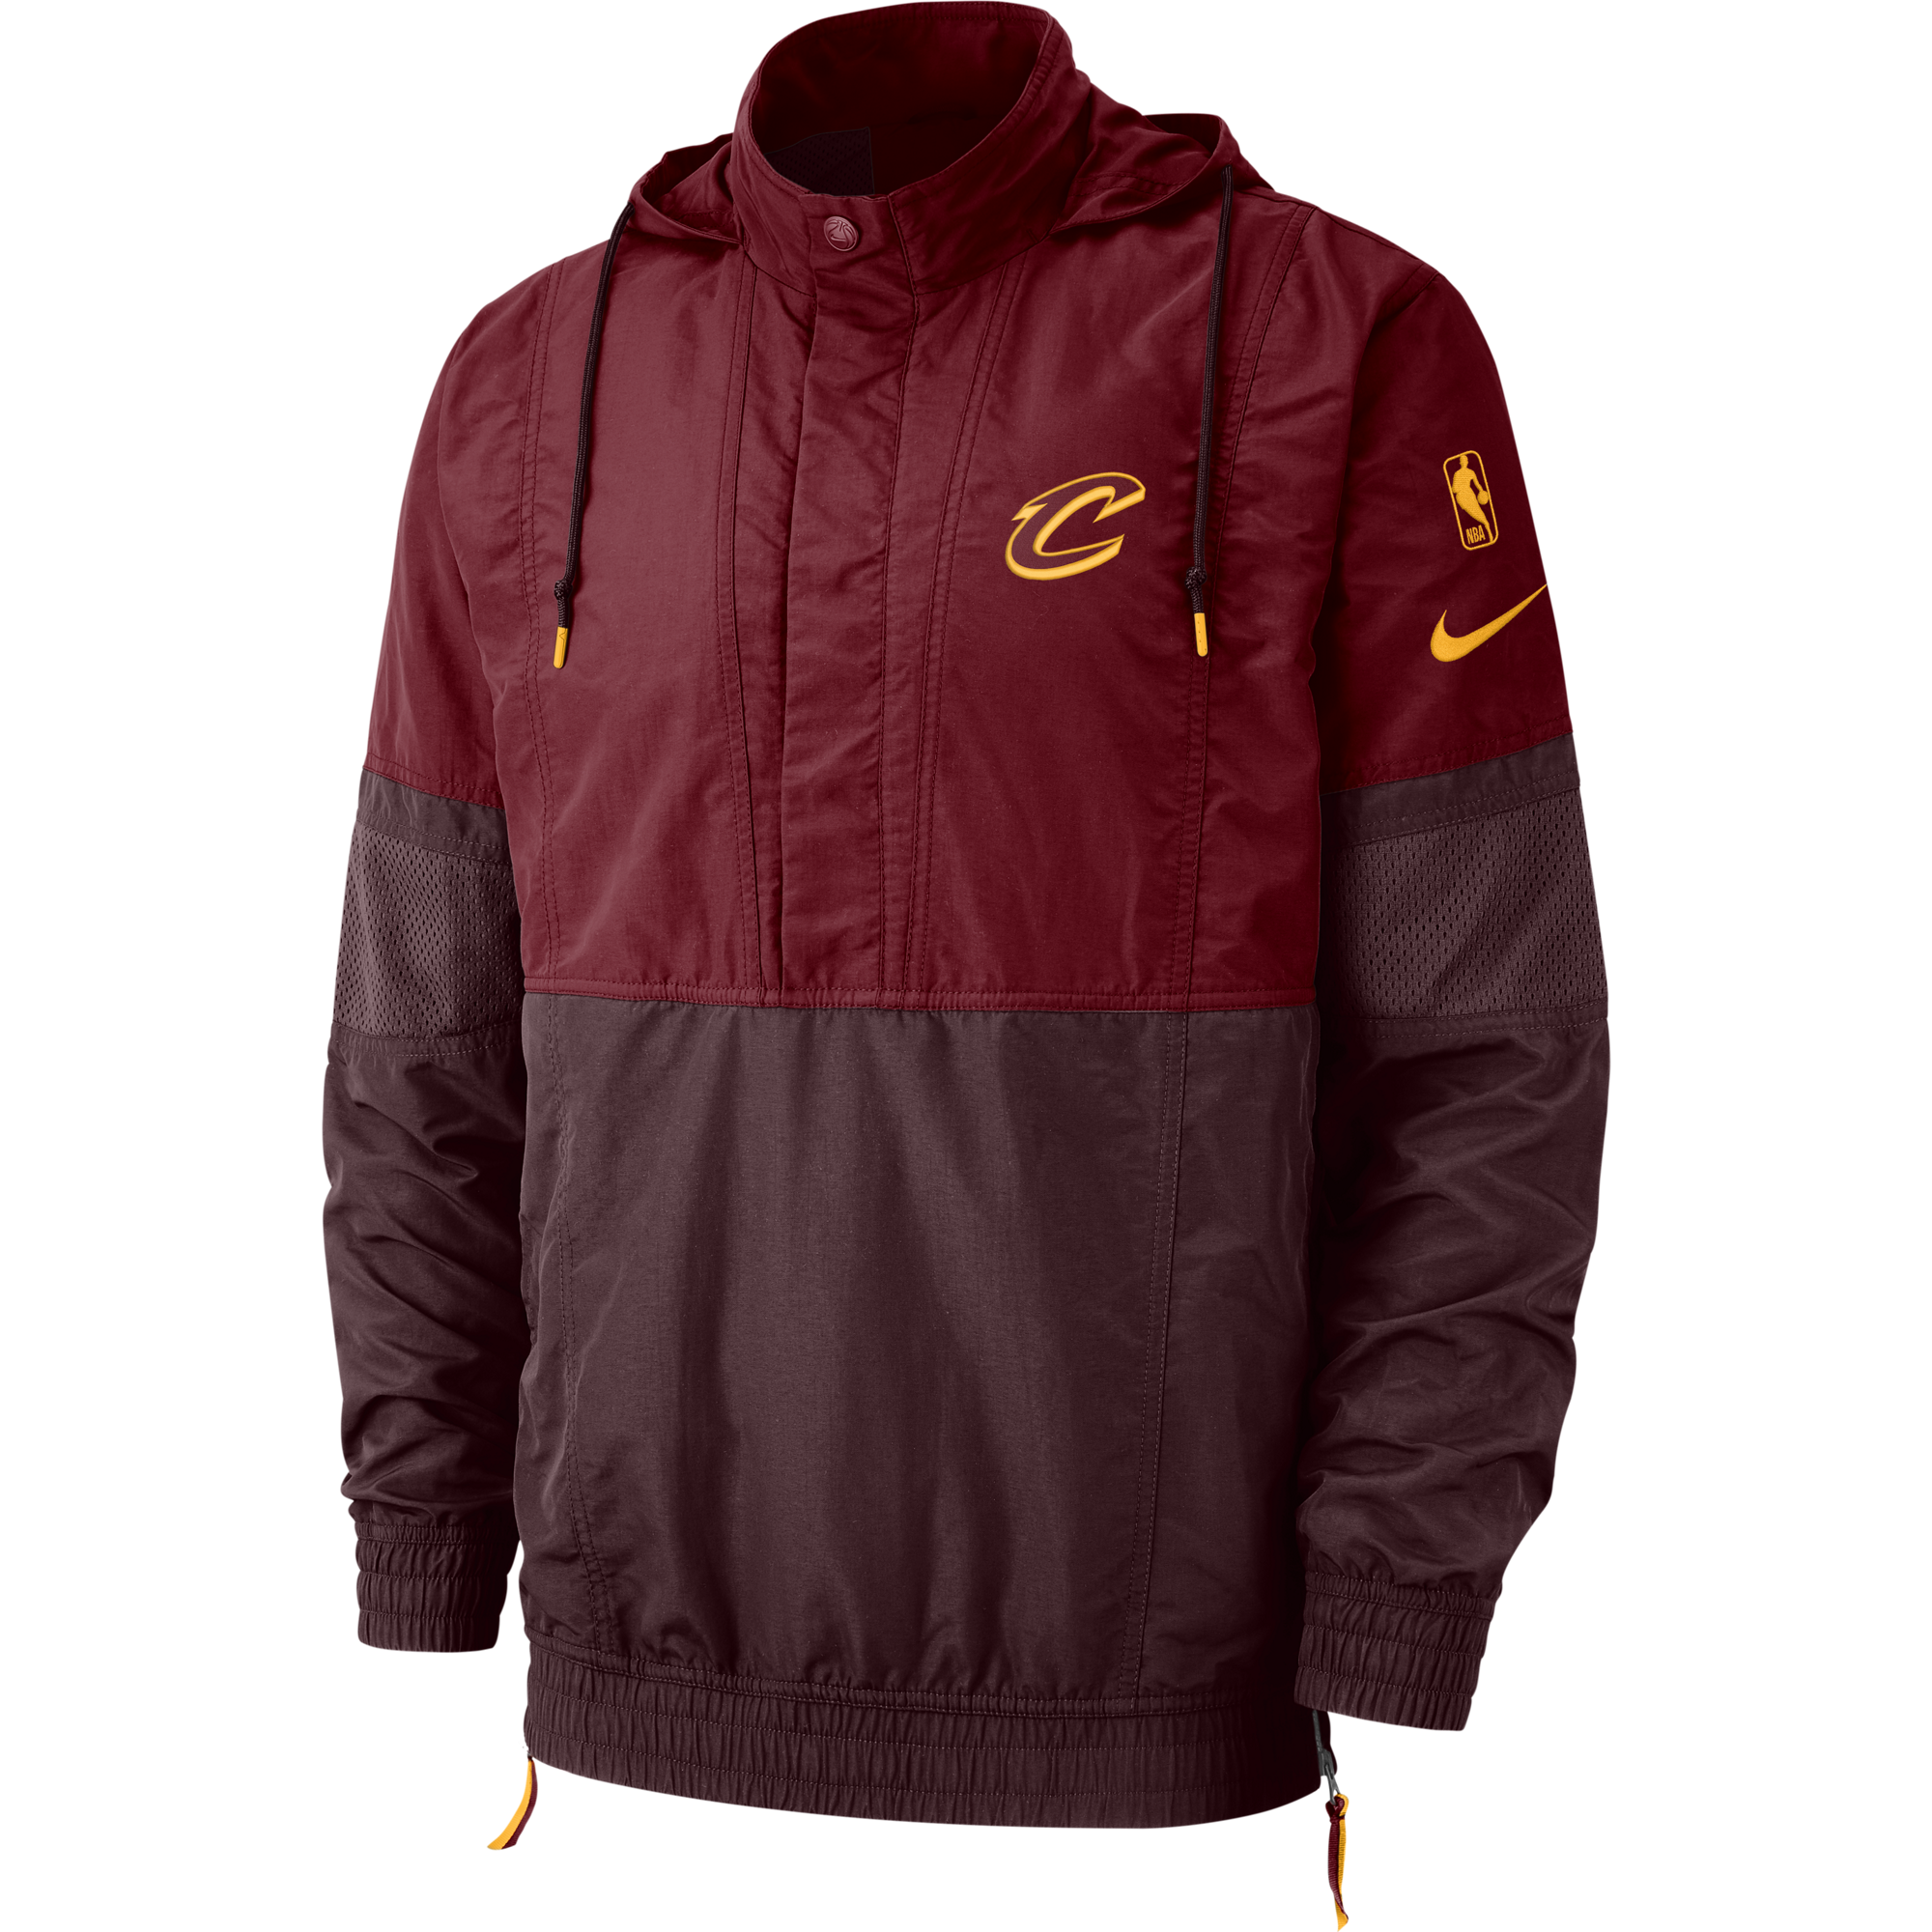 NIKE NBA CLEVELAND CAVALIERS COURTSIDE JACKET TEAM RED